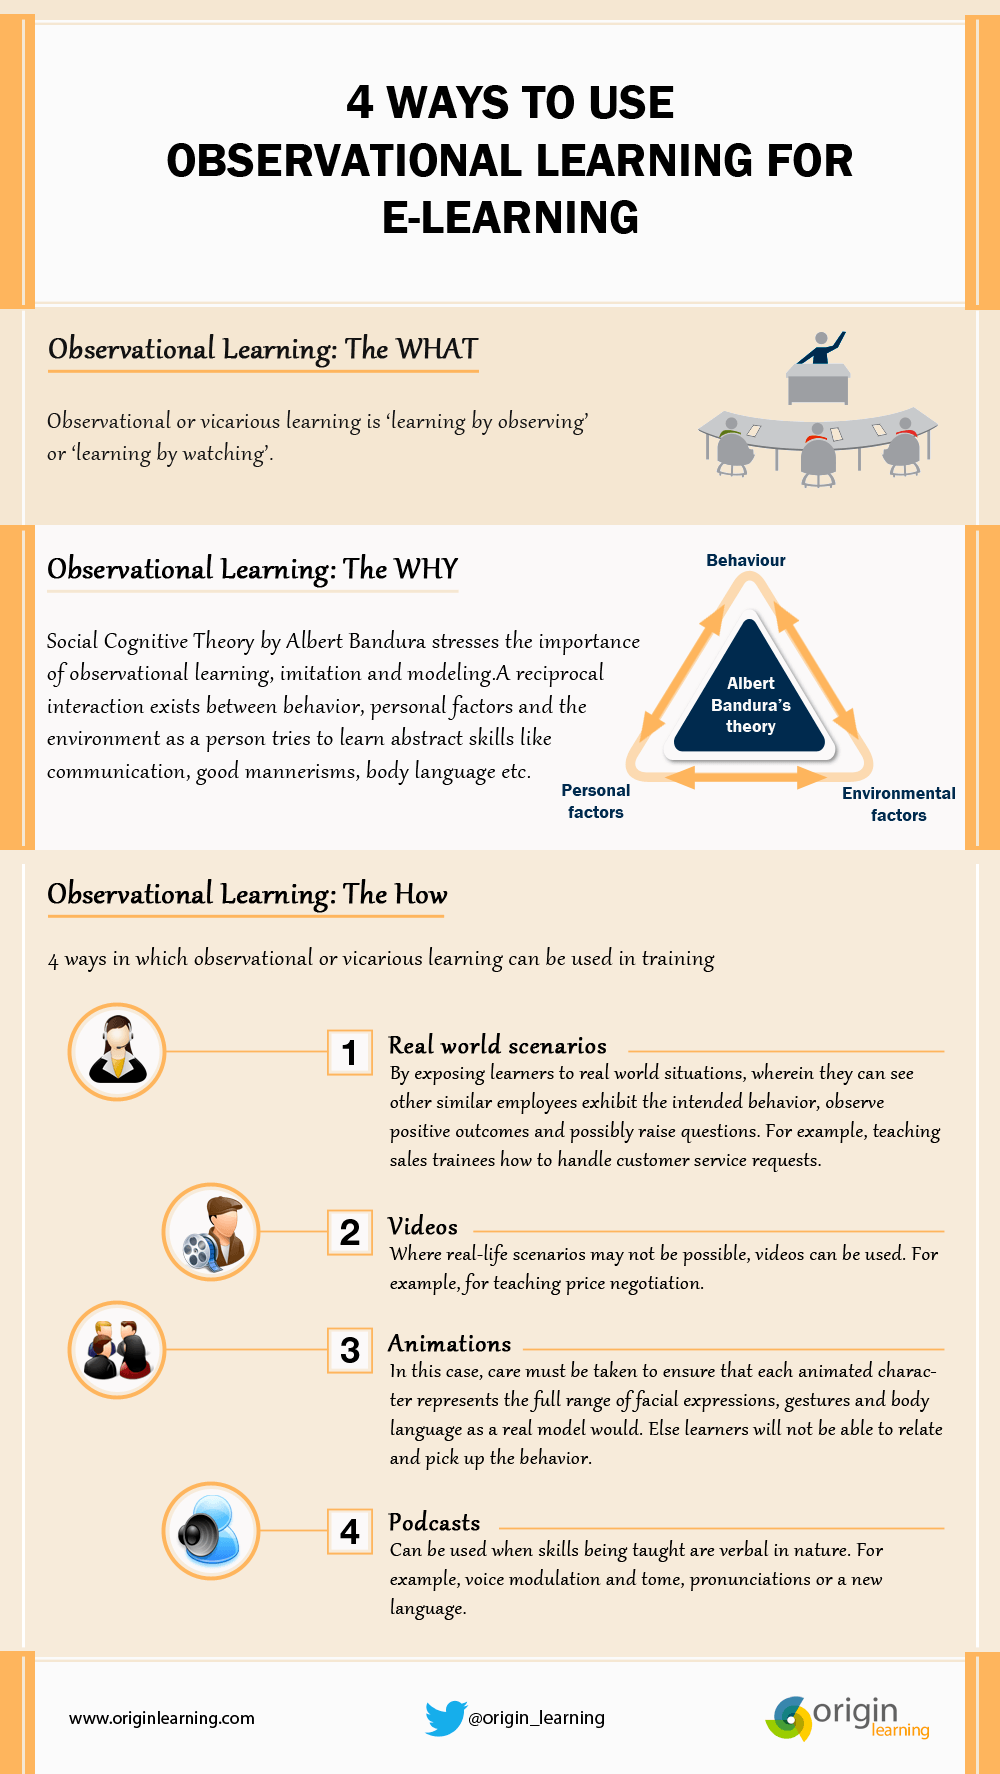 4 Ways to Use Observational Learning for eLearning Infographic